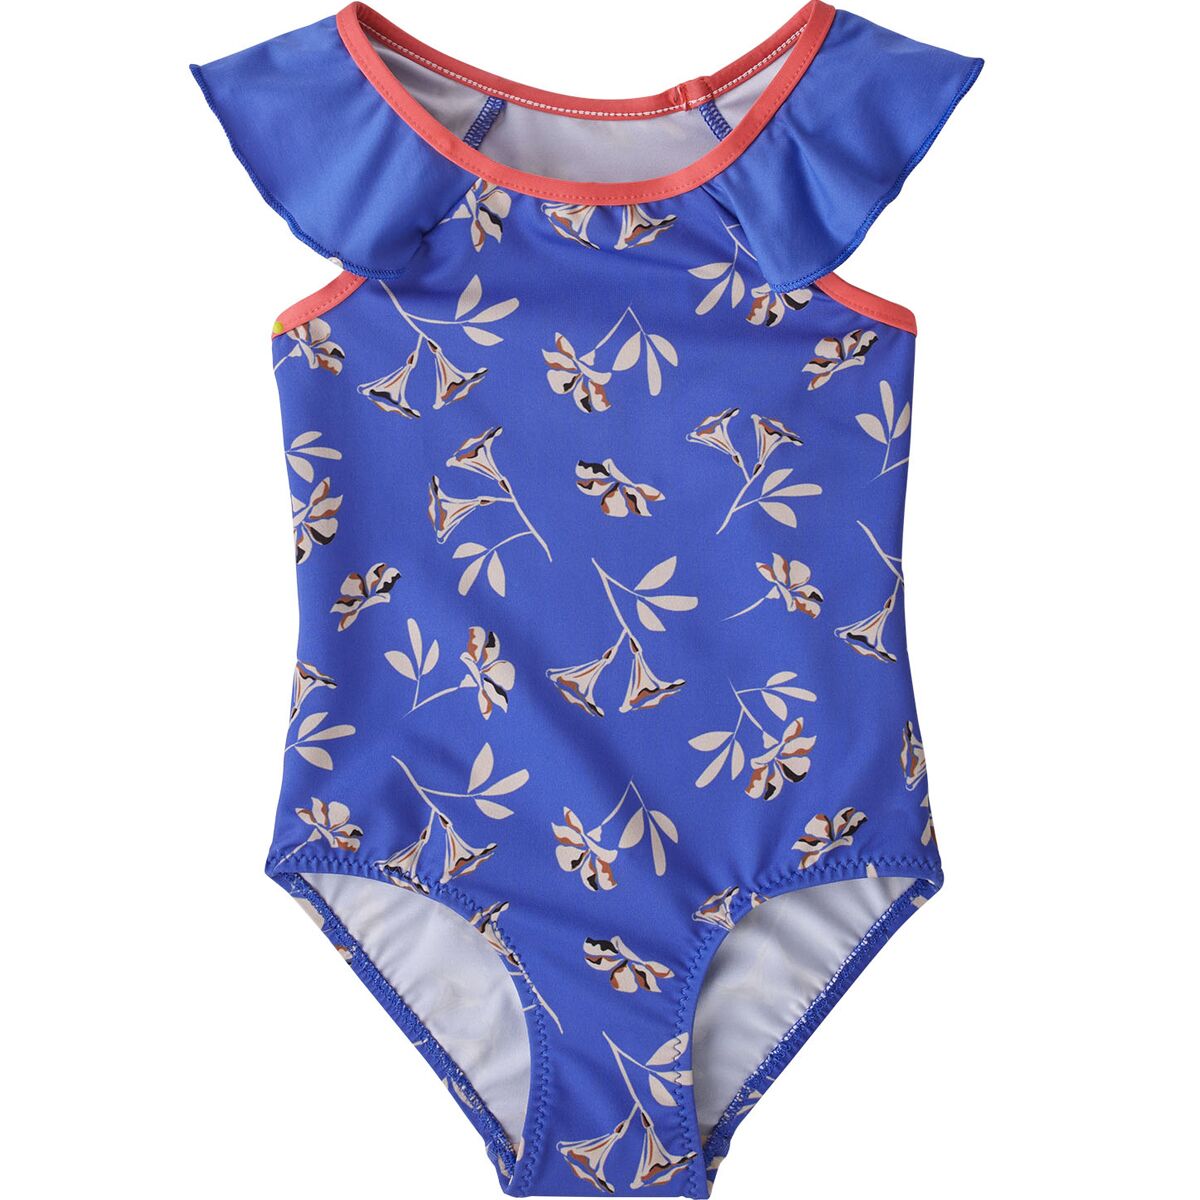 Patagonia Baby Water Sprout One-Piece Swimsuit - Infant Girls'